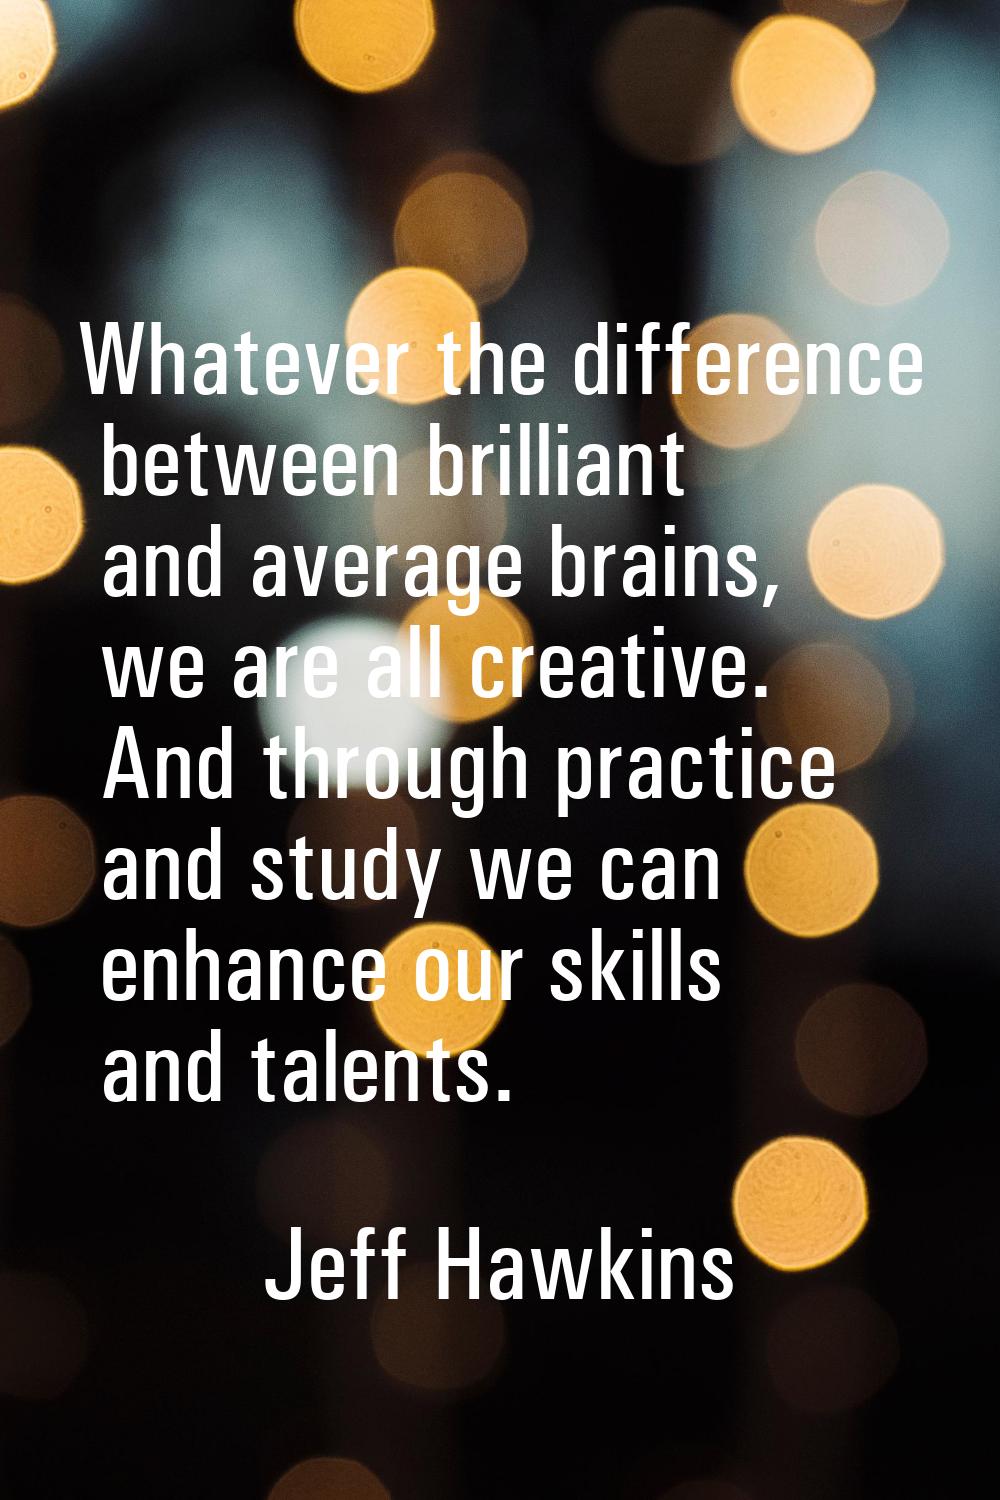 Whatever the difference between brilliant and average brains, we are all creative. And through prac